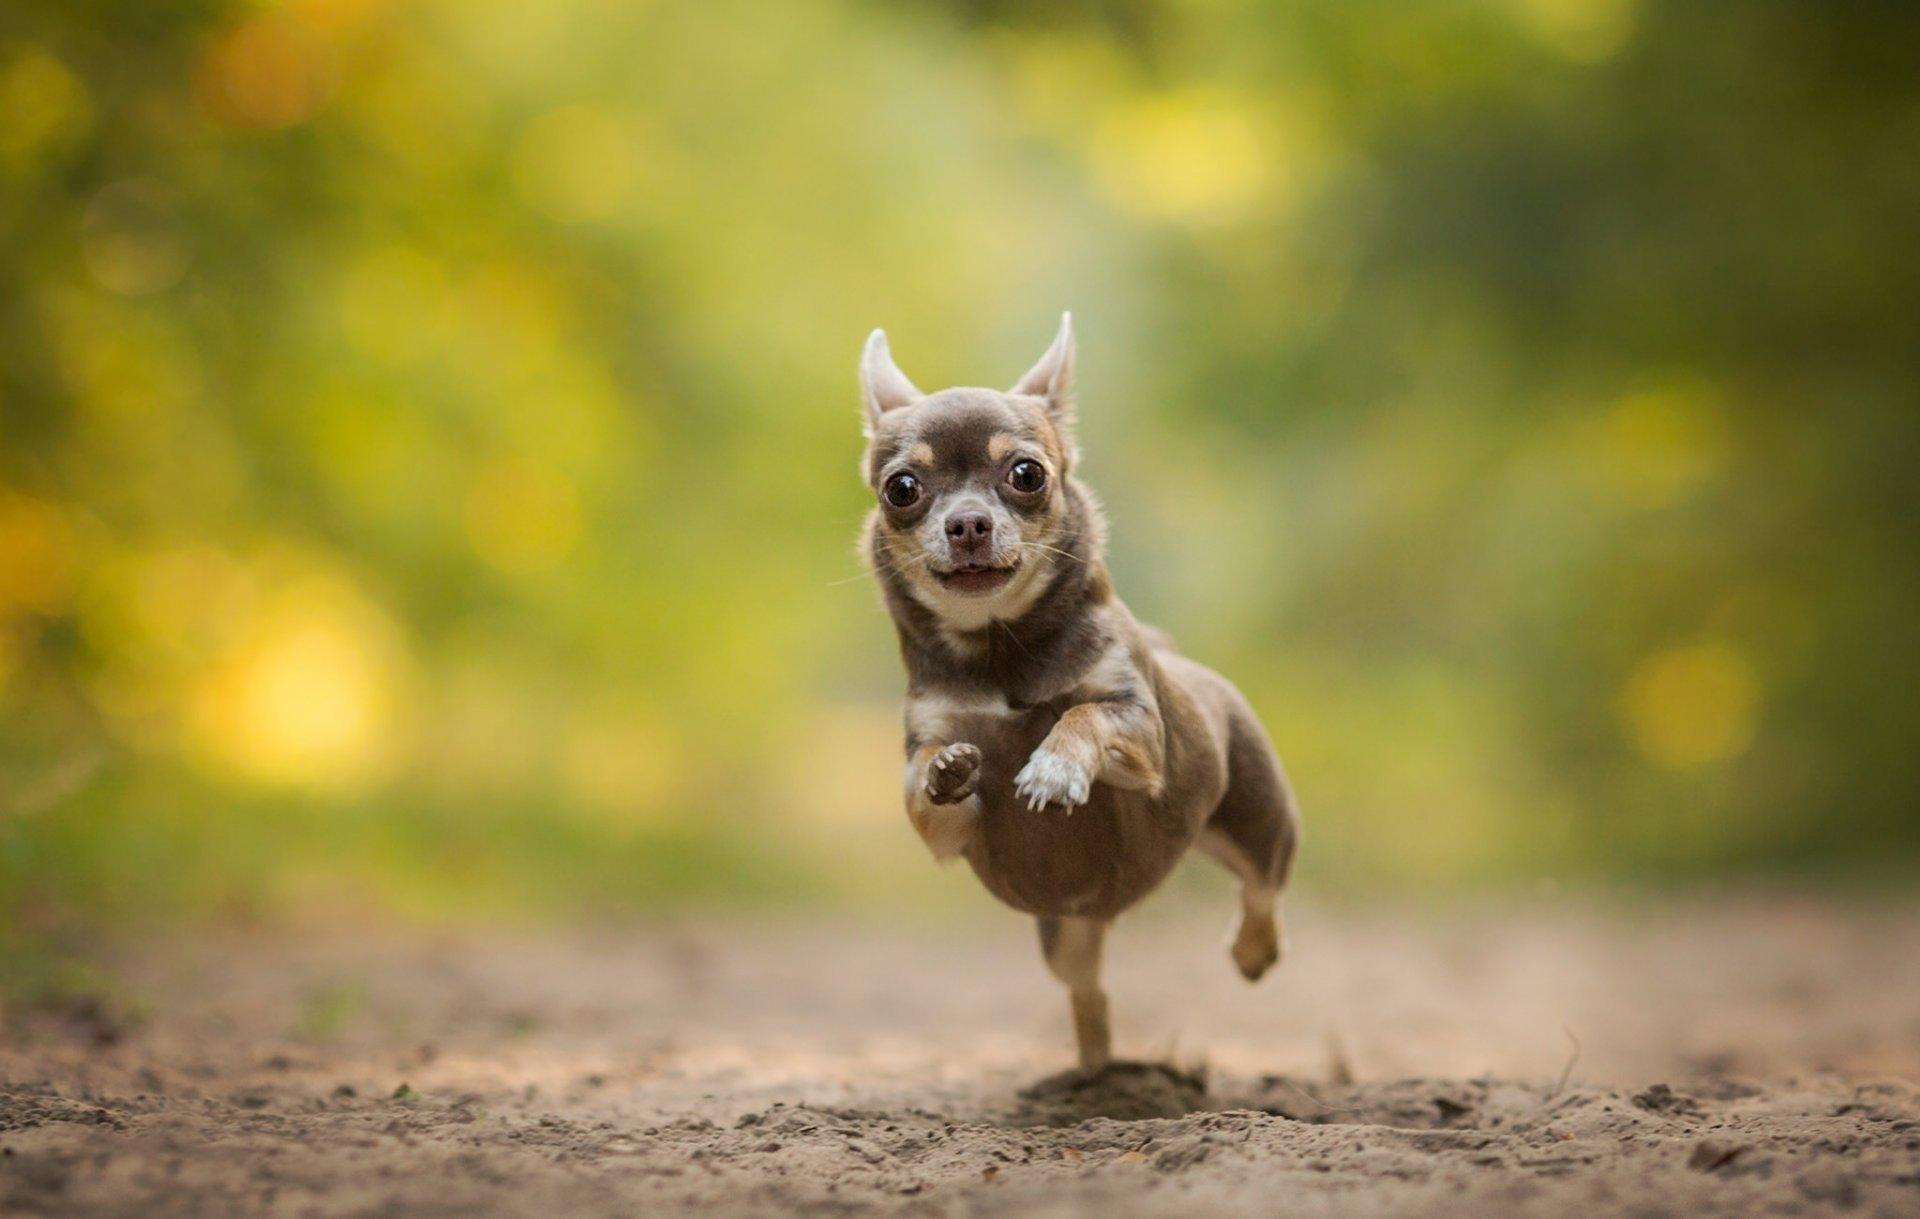 Chihuahua Wallpapers - Top Free